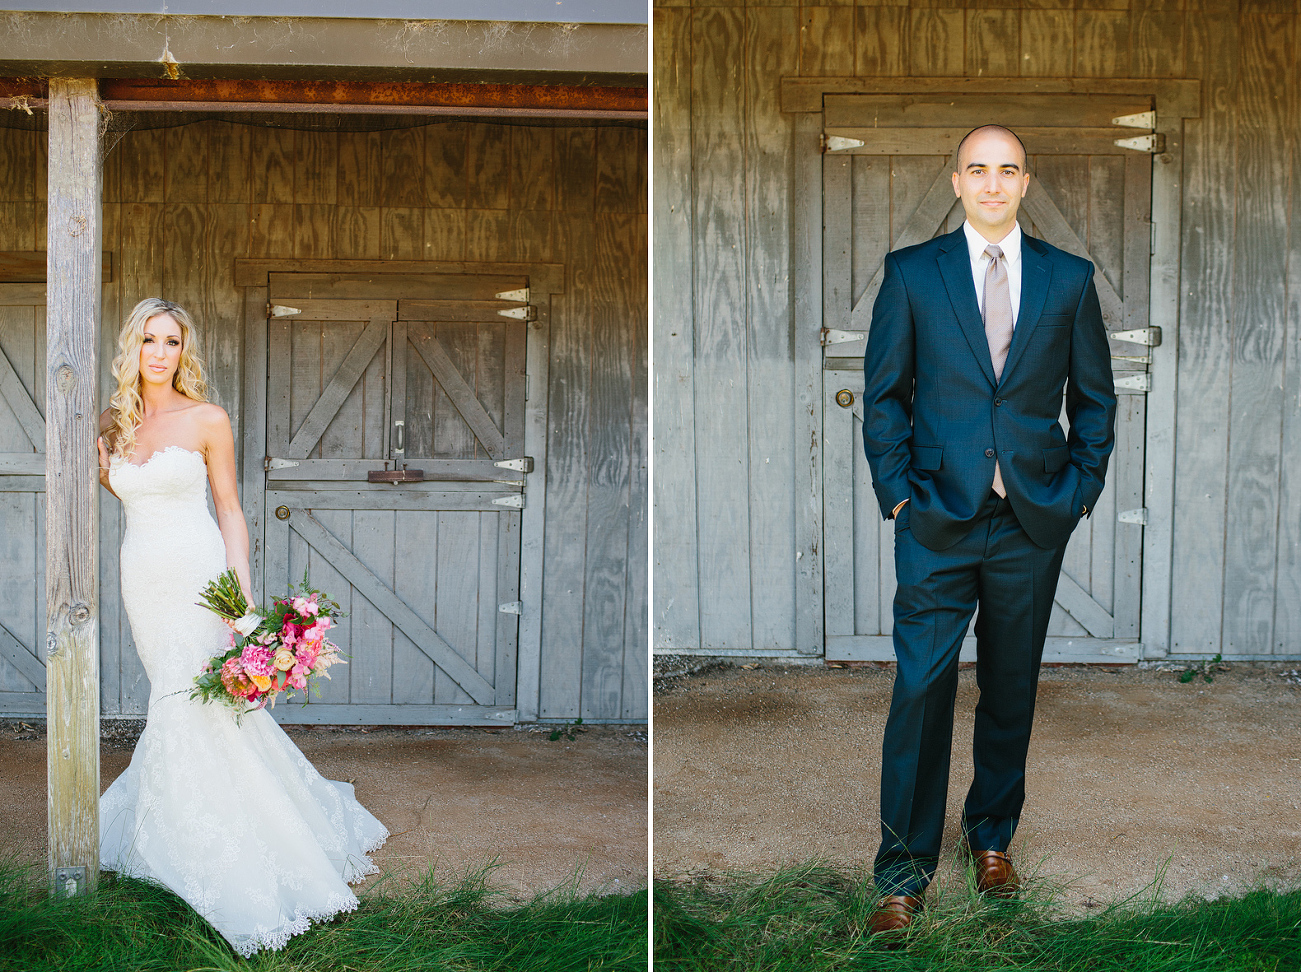 These are individual portrait photos of the bride and groom in front of a barn. 